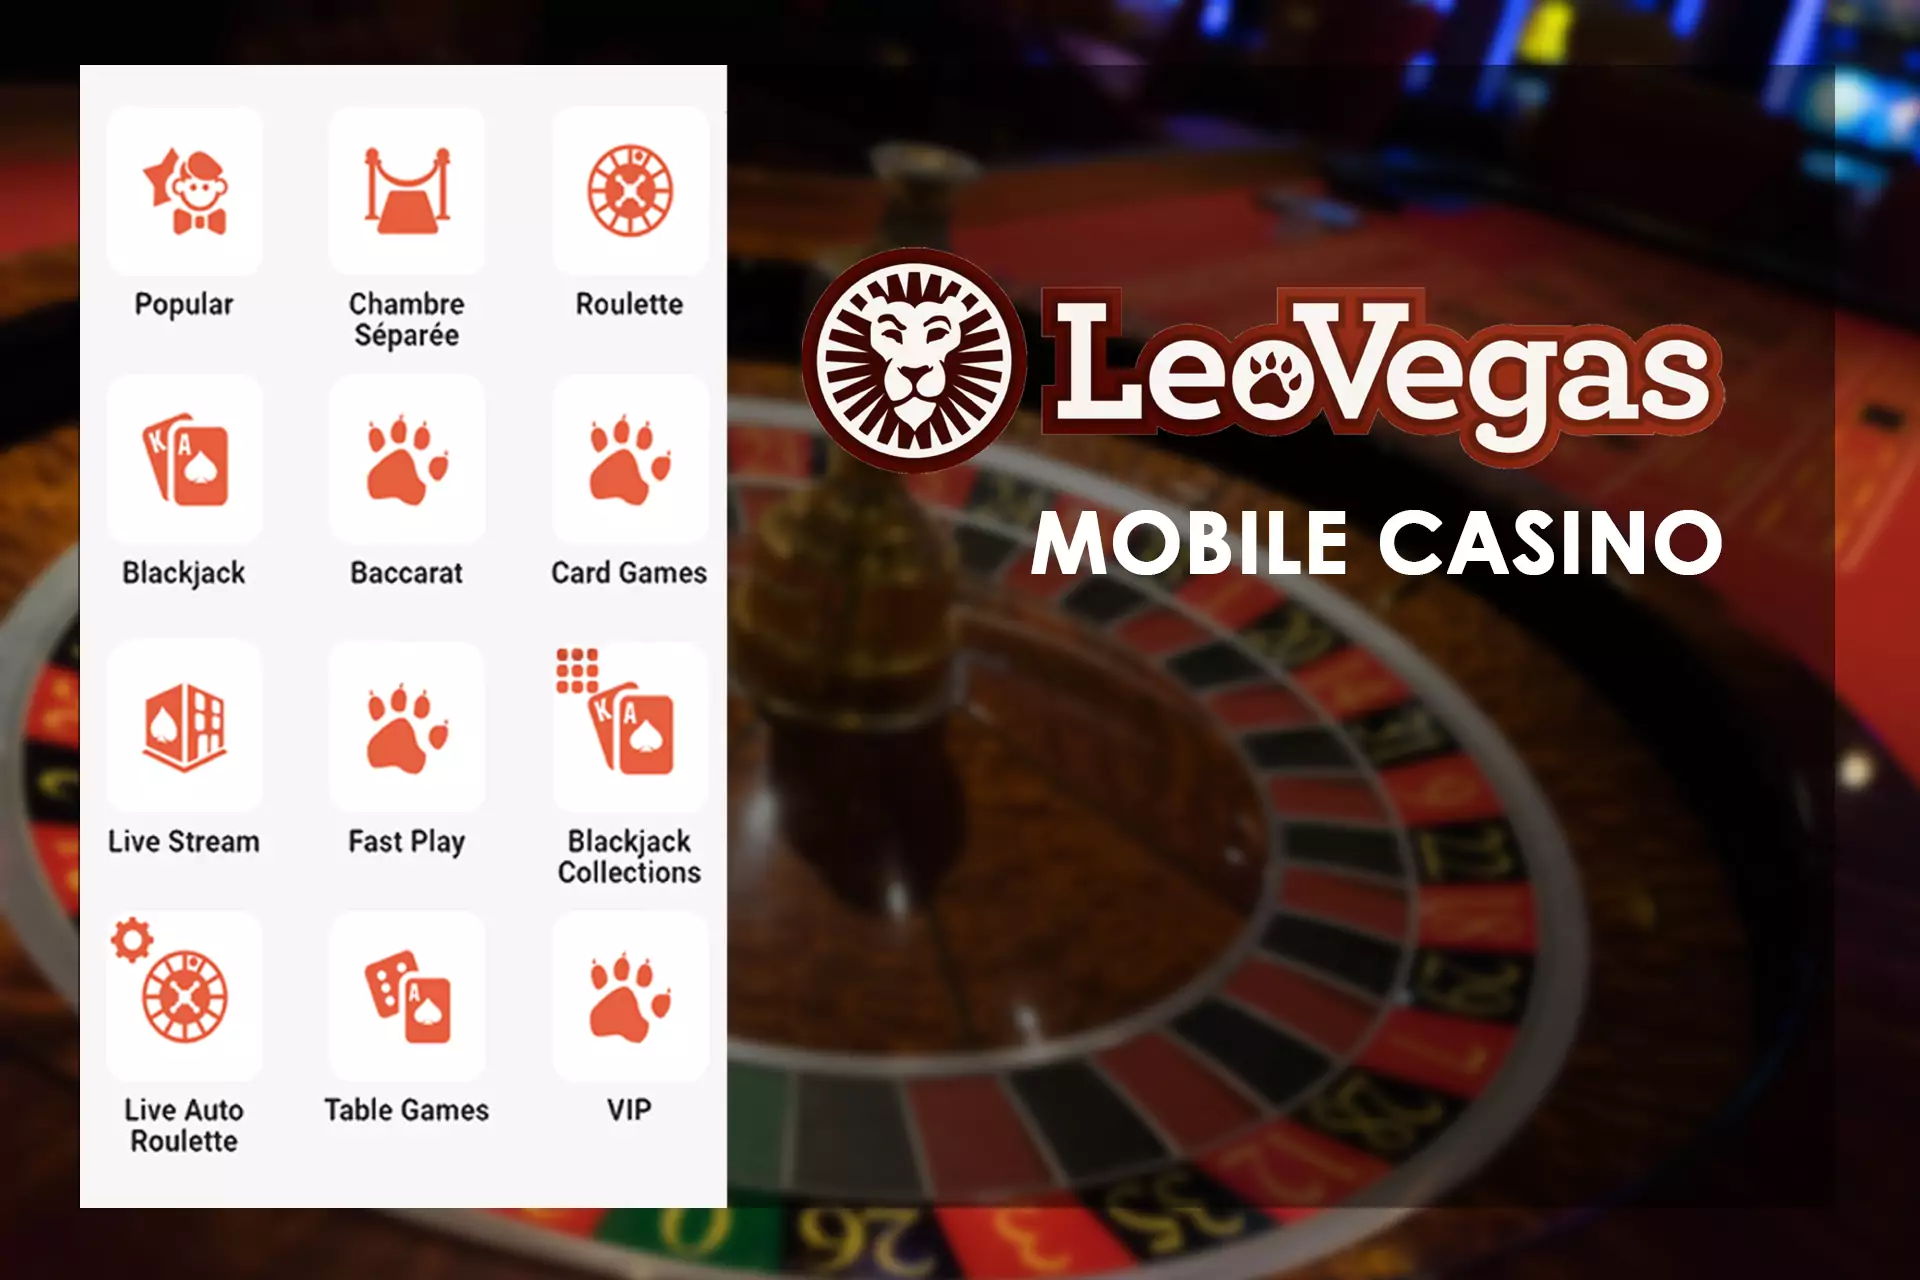 Casino players can find slots, table games in LeoVegas app as well.